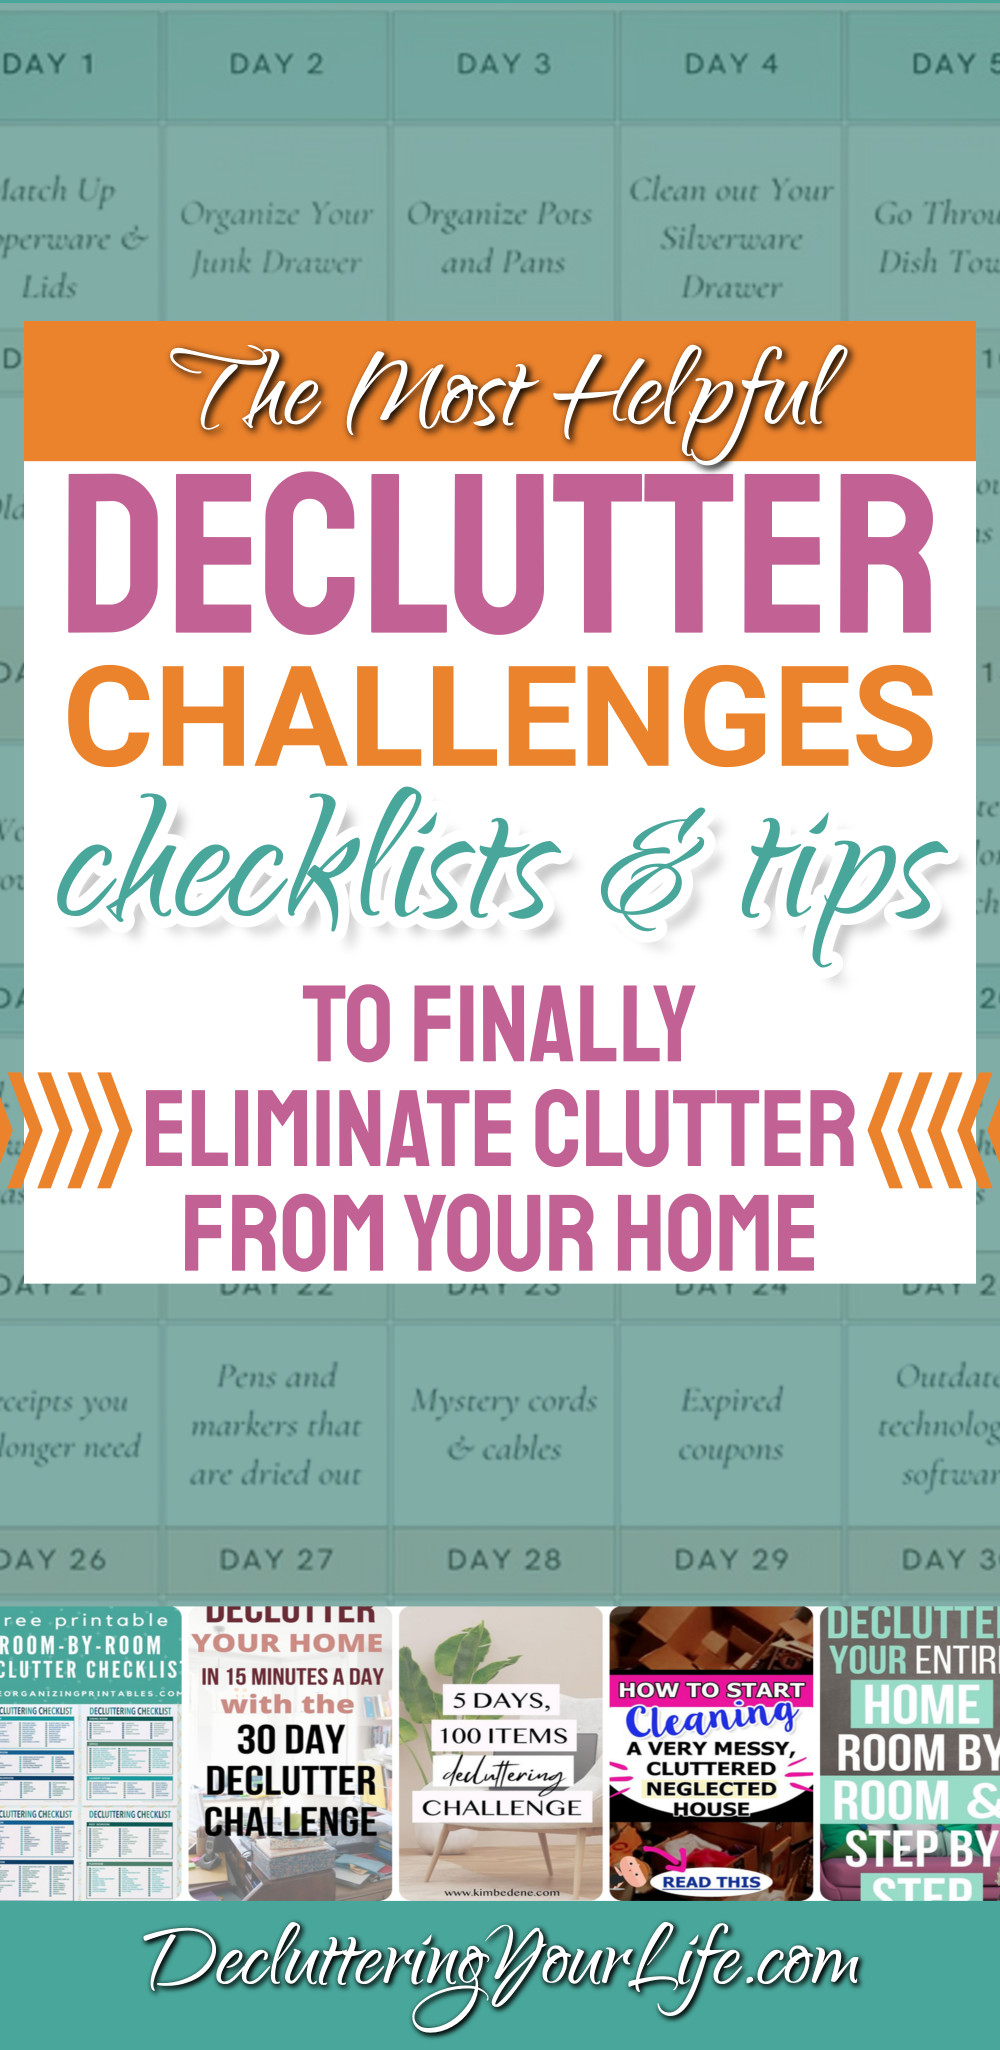 Declutter challenge checklists and tips